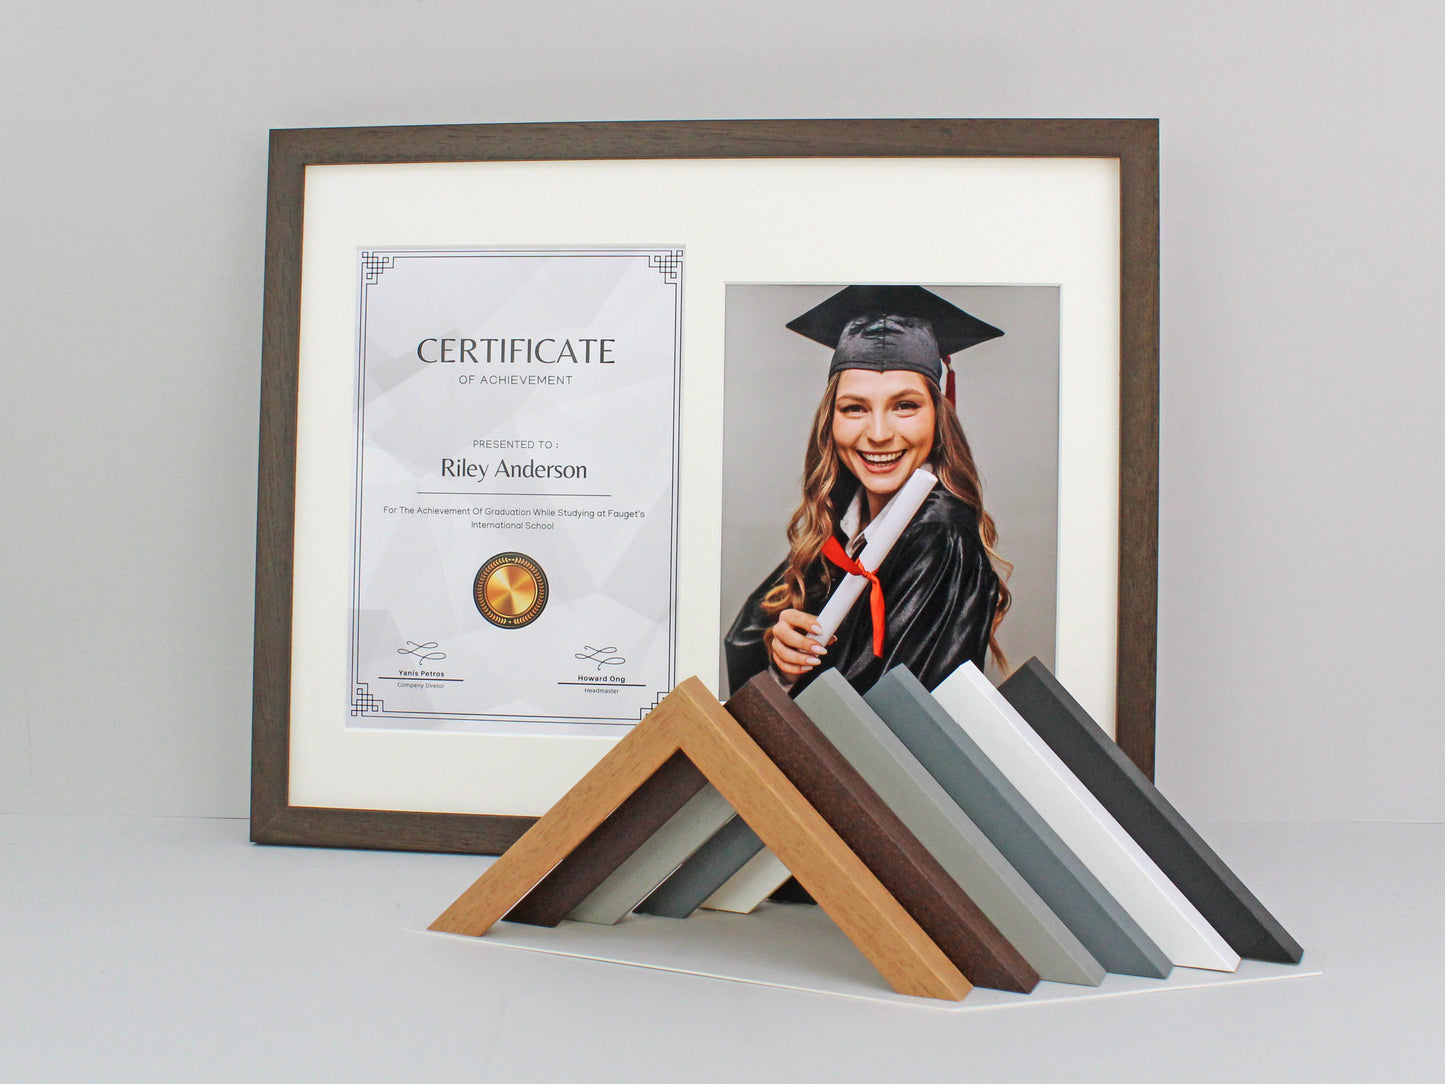 Certificate, Graduation, Diploma Frame with Photo. Suits an A4 Sized Certificate/image and a 10x8" Photo.